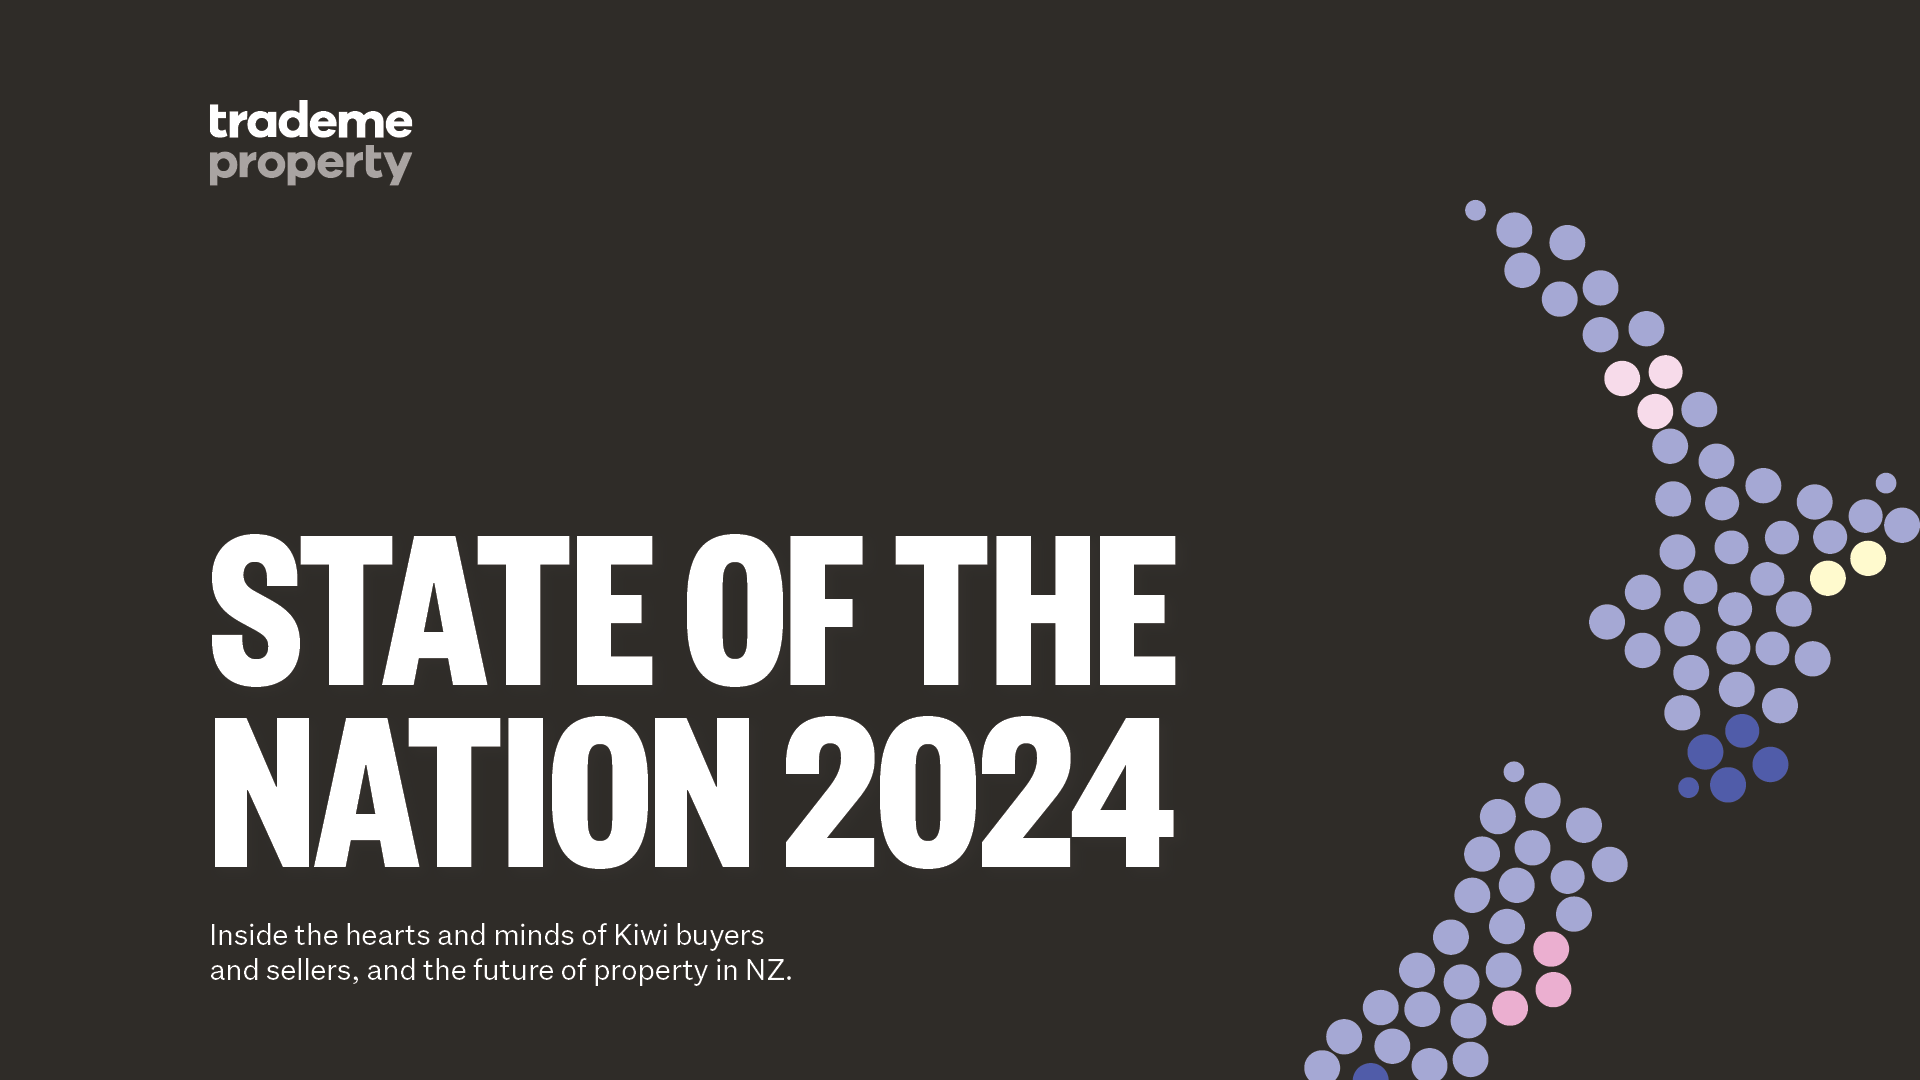 State of the Nation 2024 with dot illustration of Aotearoa